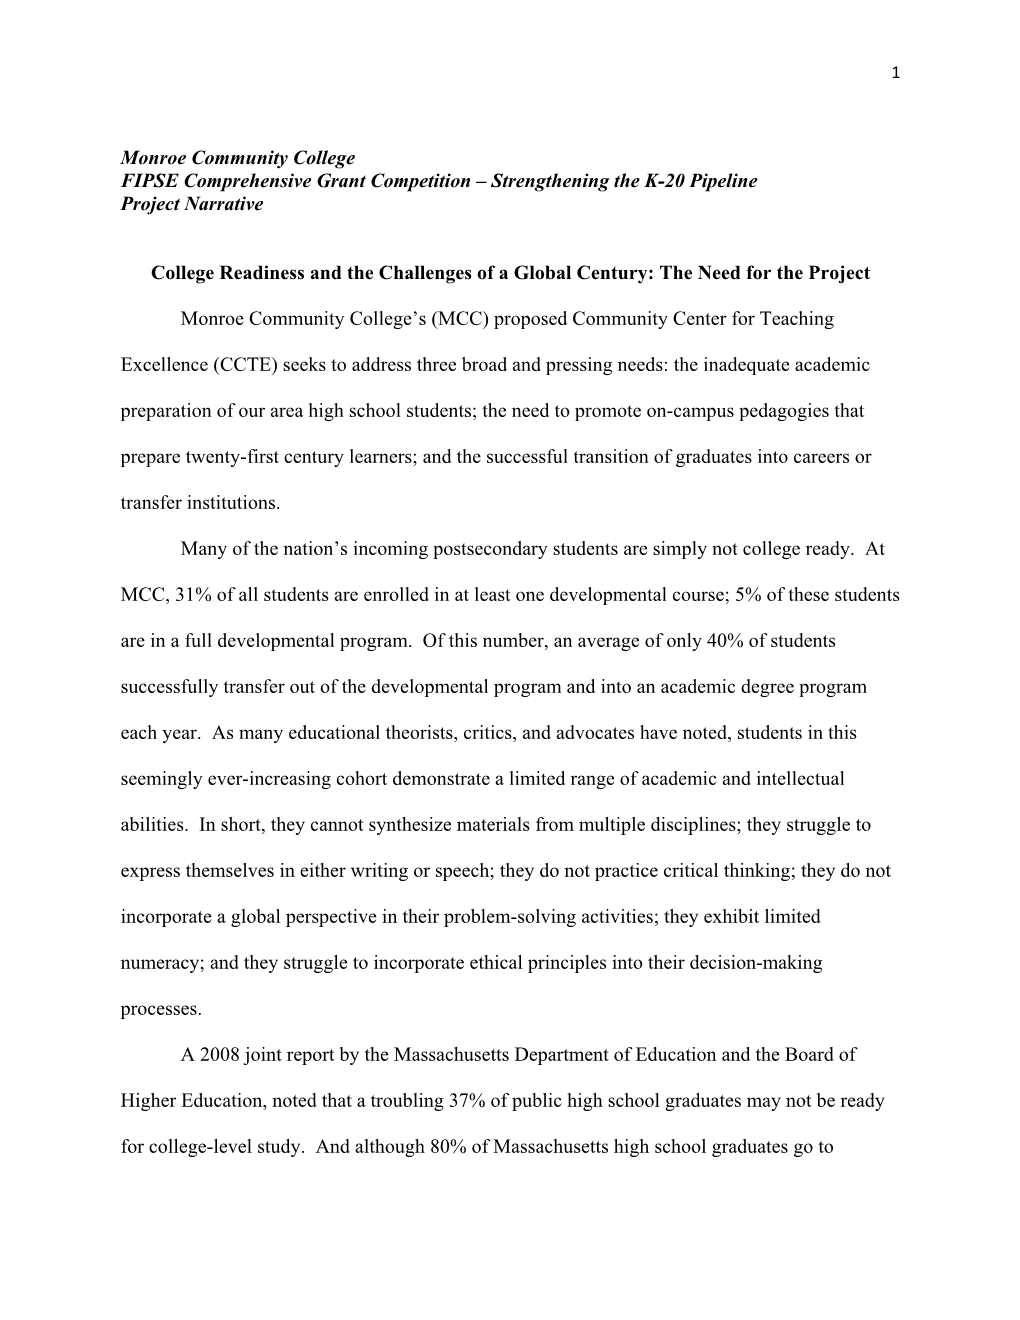 Monroe Community College FIPSE Comprehensive Grant Competition – Strengthening the K-20 Pipeline Project Narrative